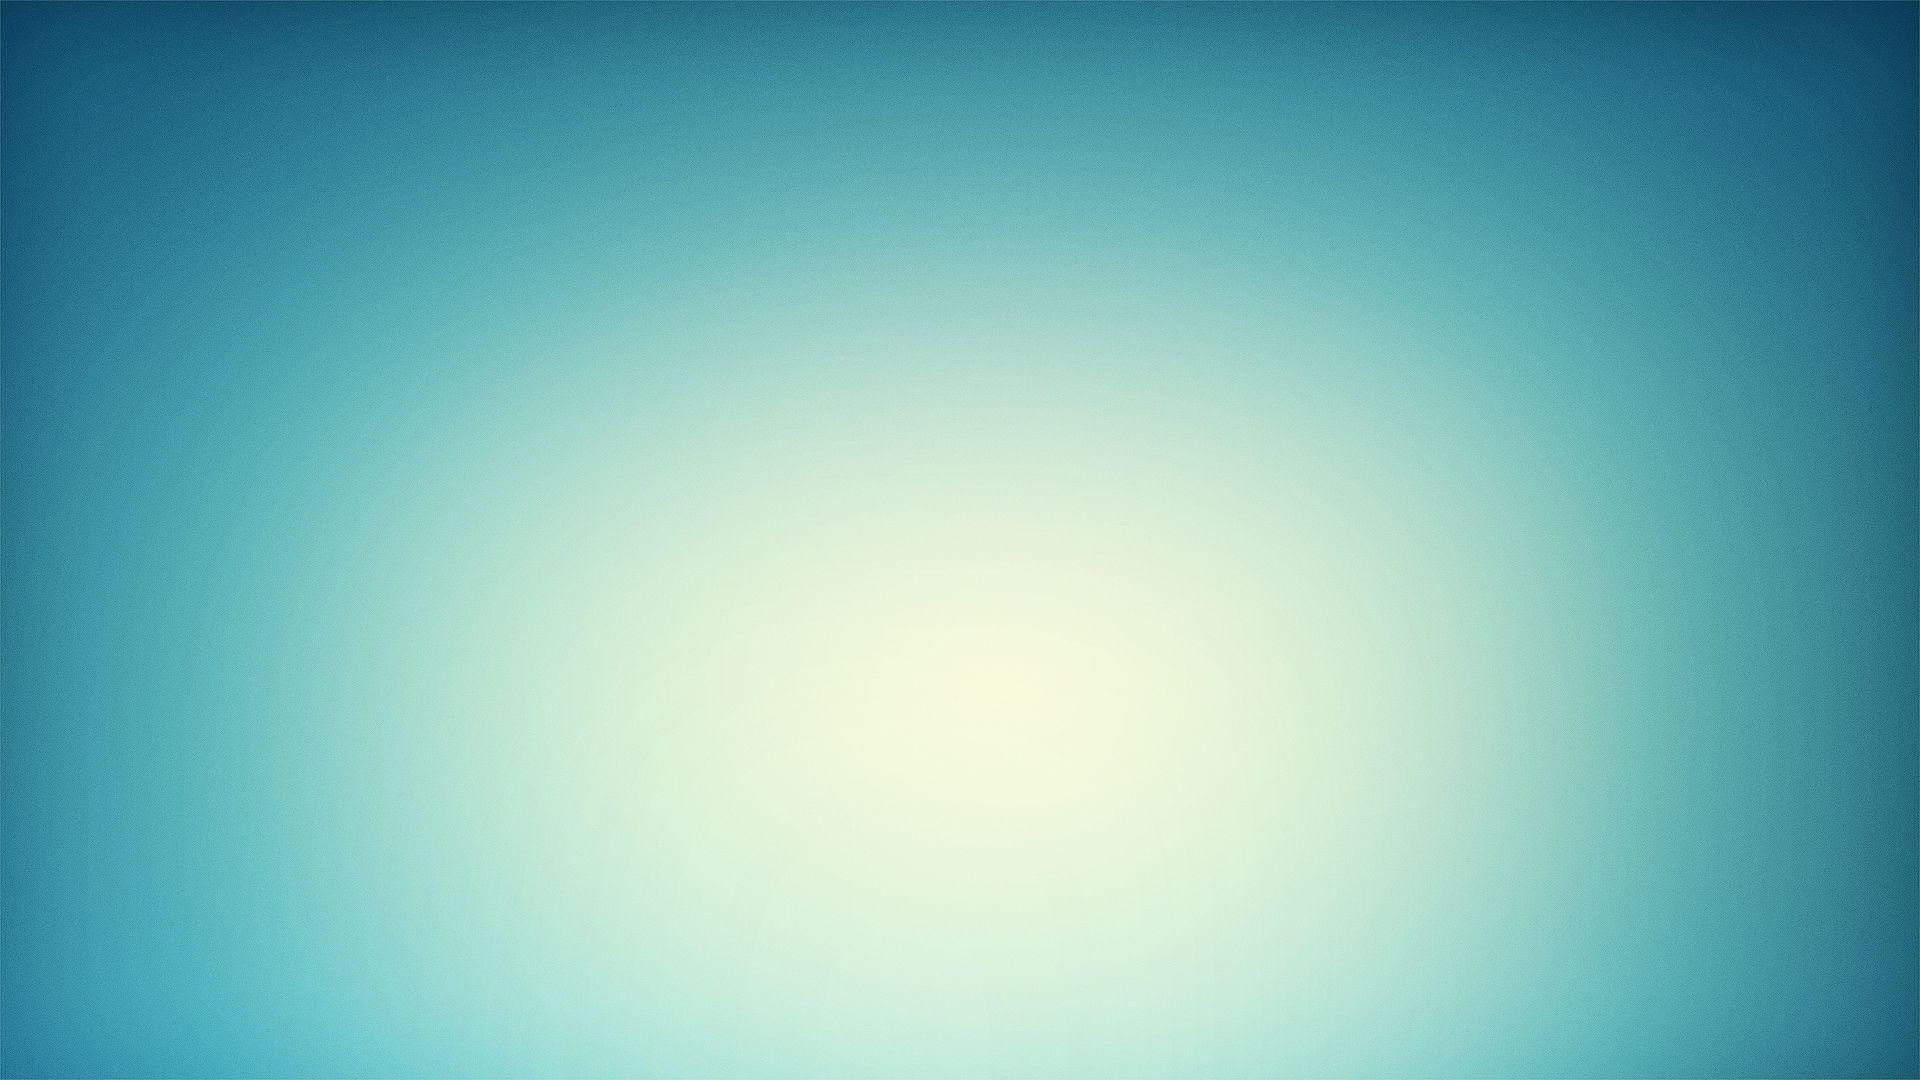 Single Colour Hd Wallpapers